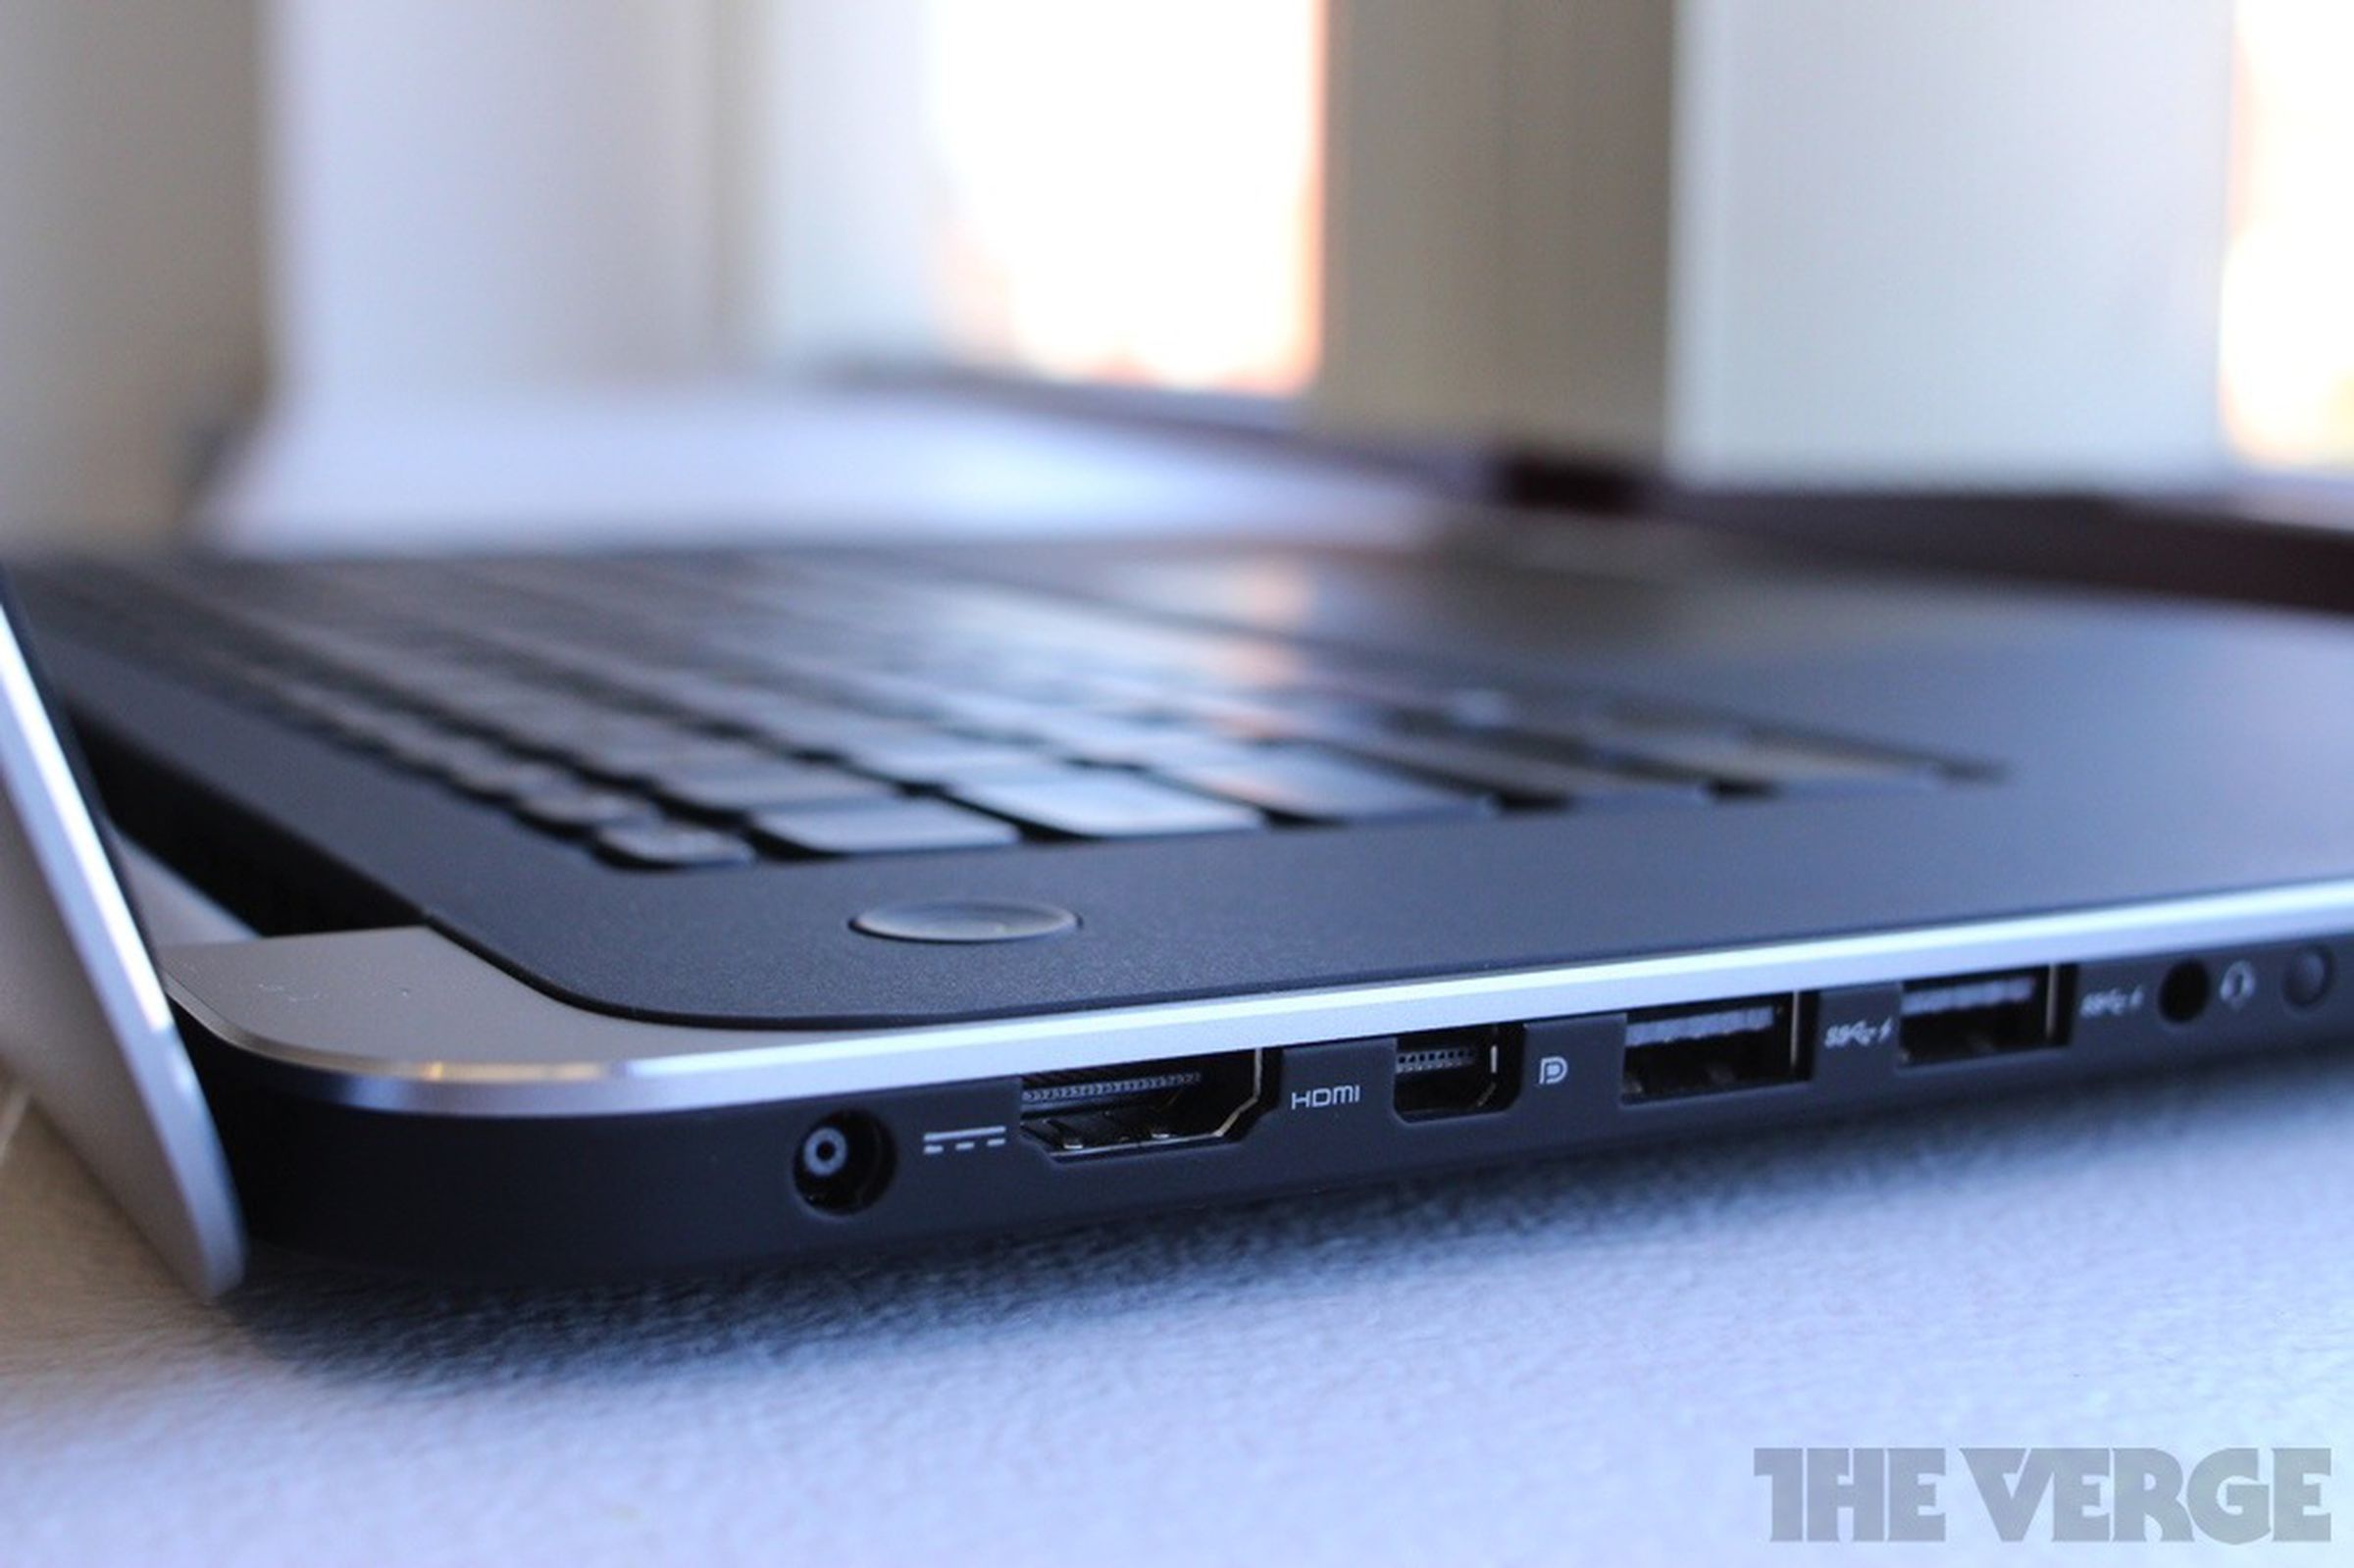 Dell XPS 15 (2013) hands-on pictures